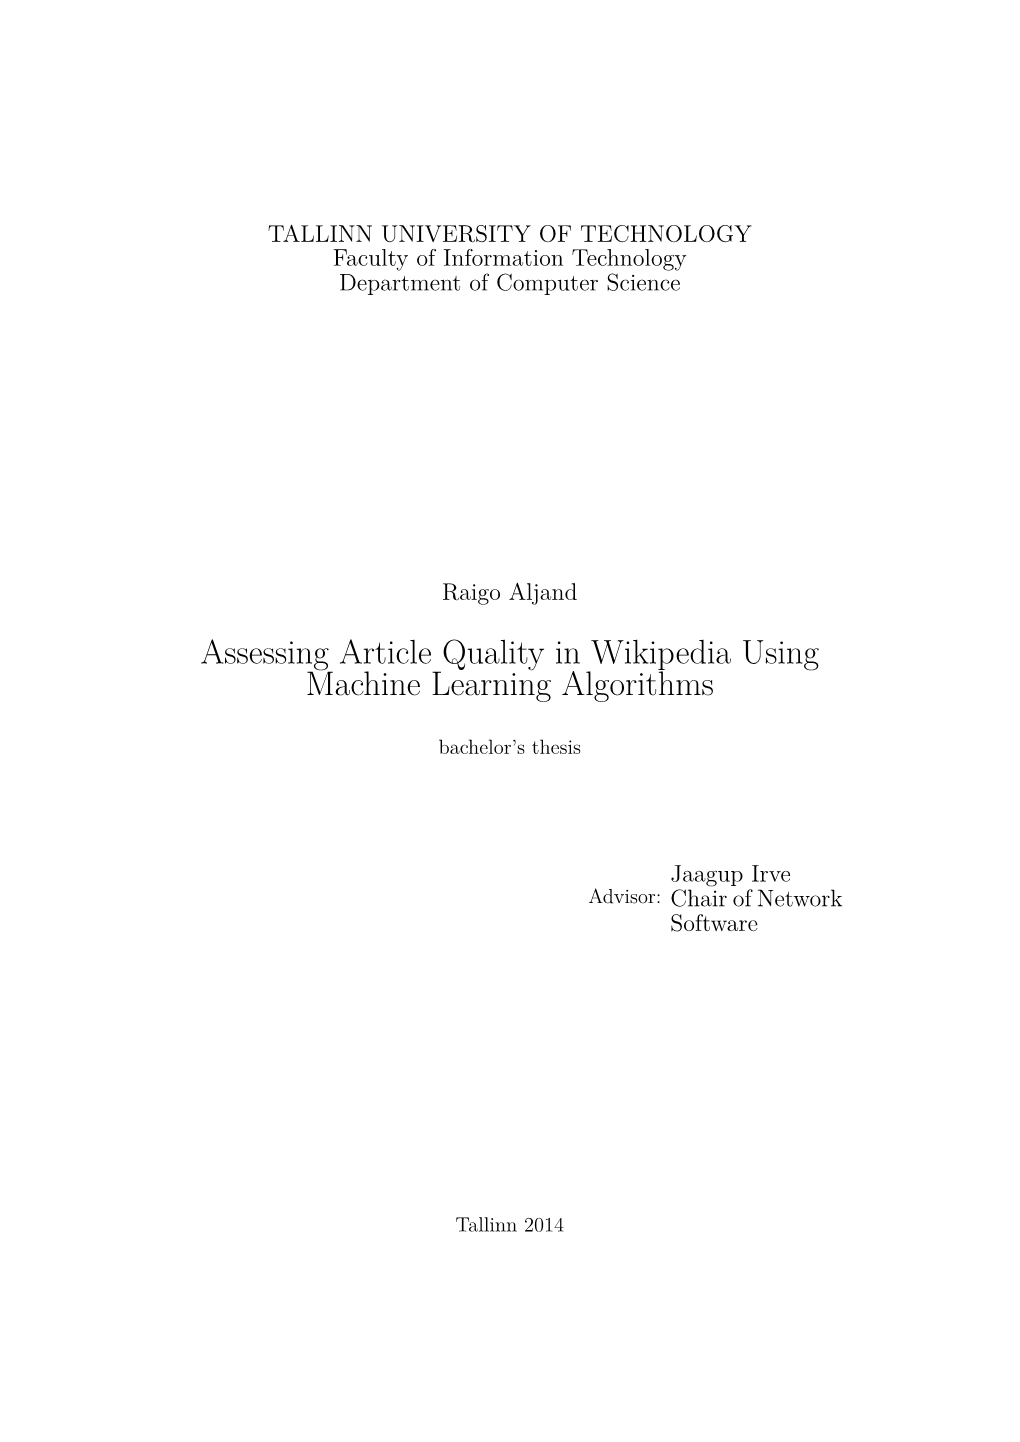 Assessing Article Quality in Wikipedia Using Machine Learning Algorithms